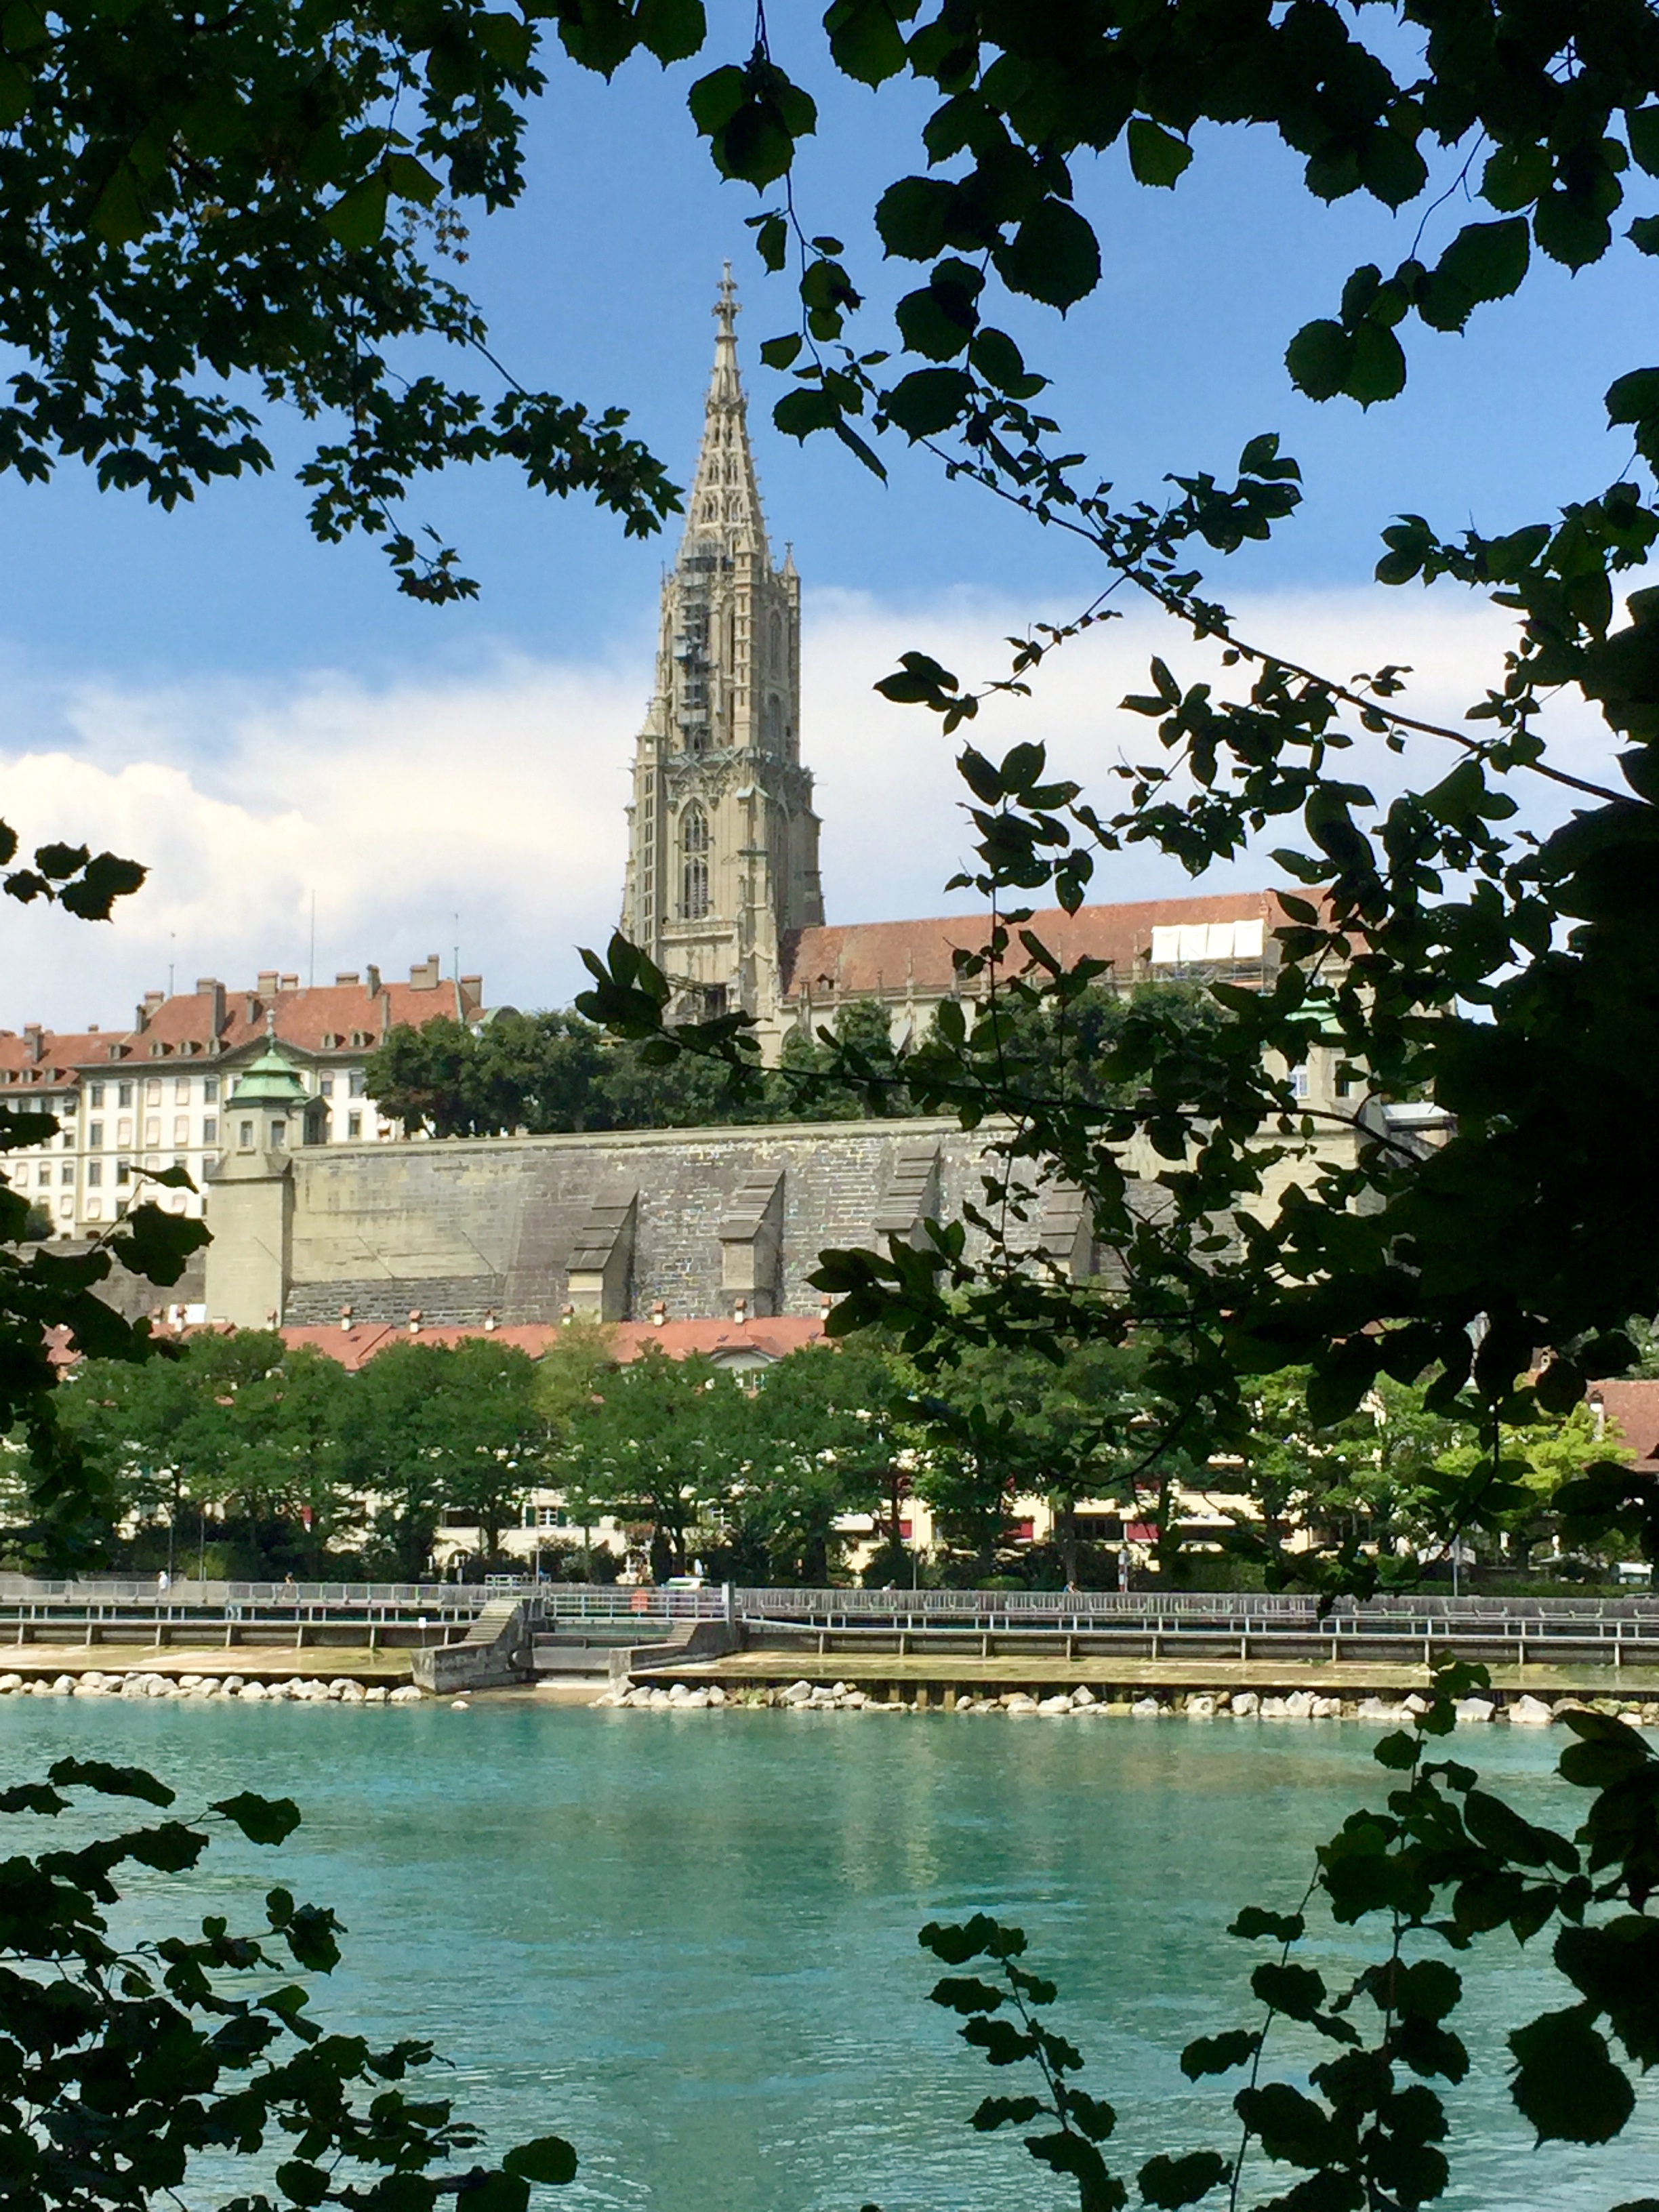 The cathedral of Bern, Switzerland, through the trees with a waterway in front of it